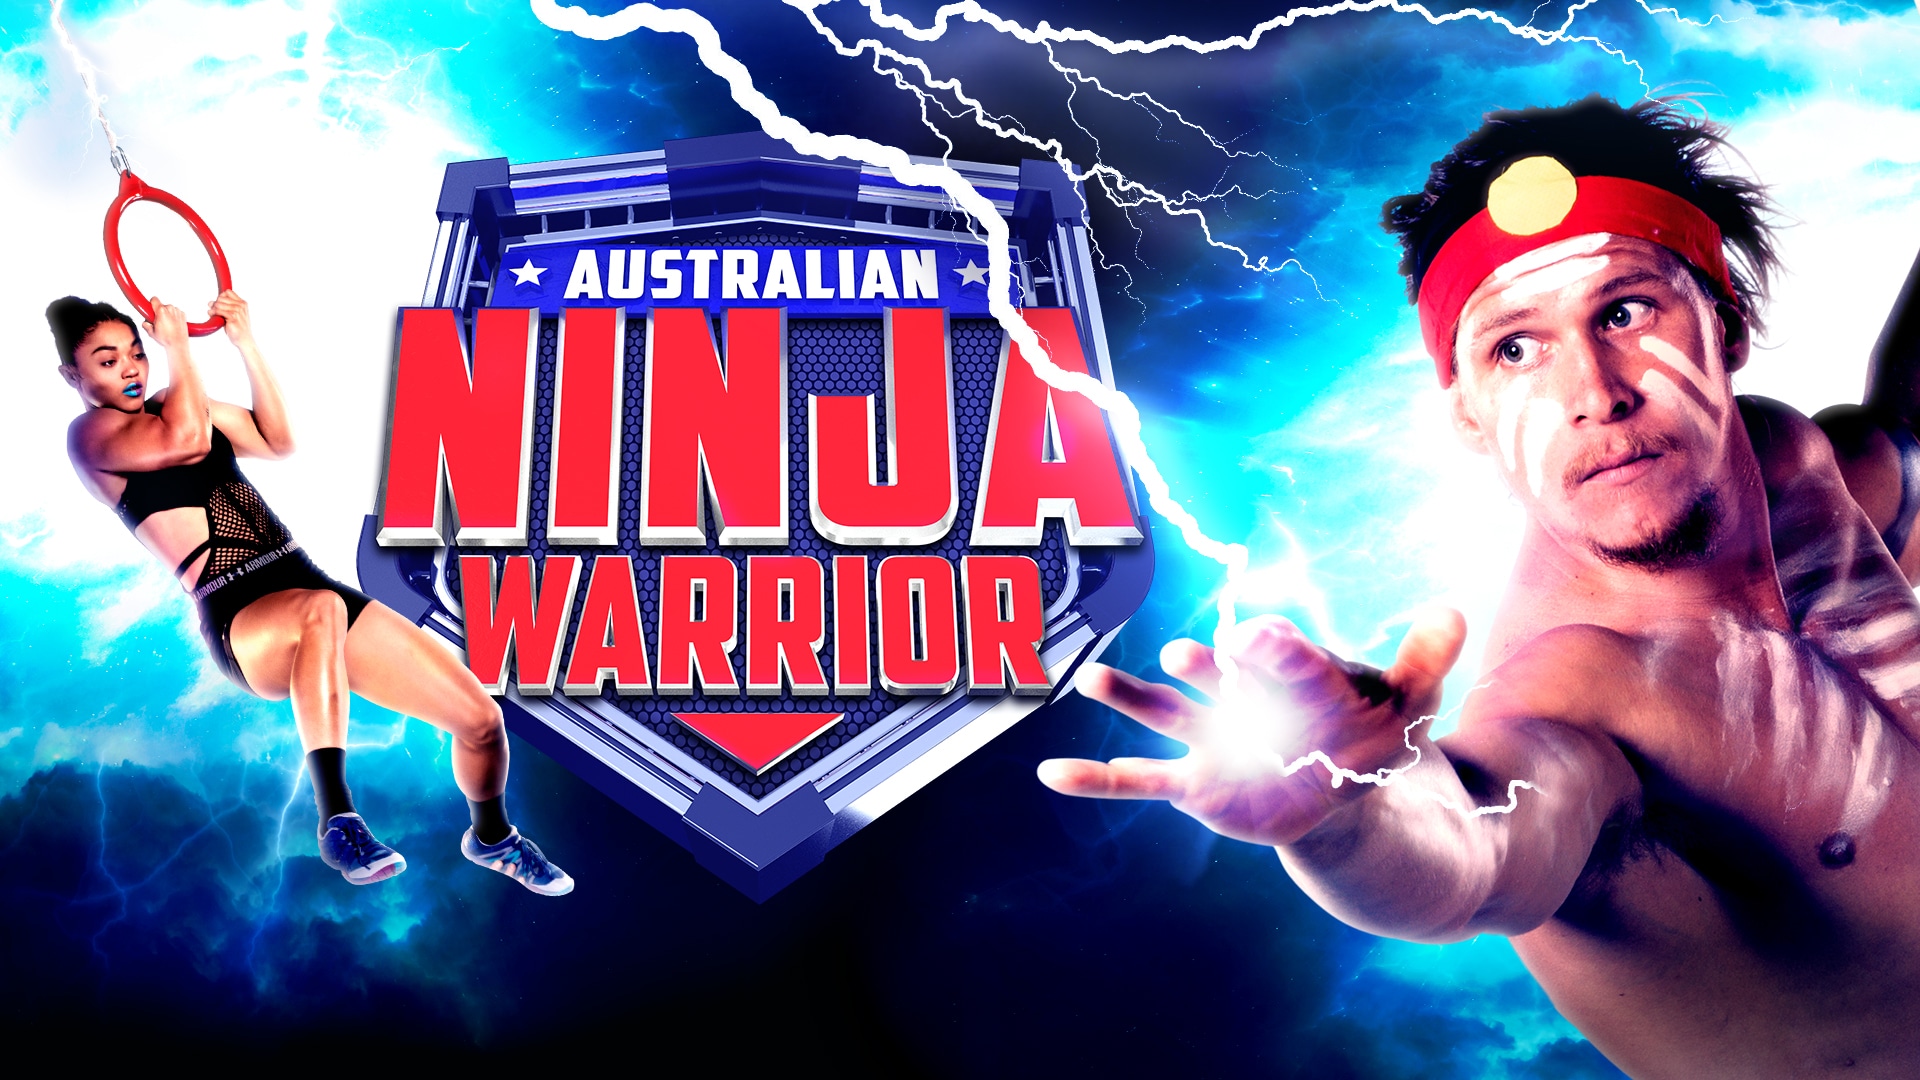 Australian Ninja Warrior is Moving to a New Home in Melbourne Nine